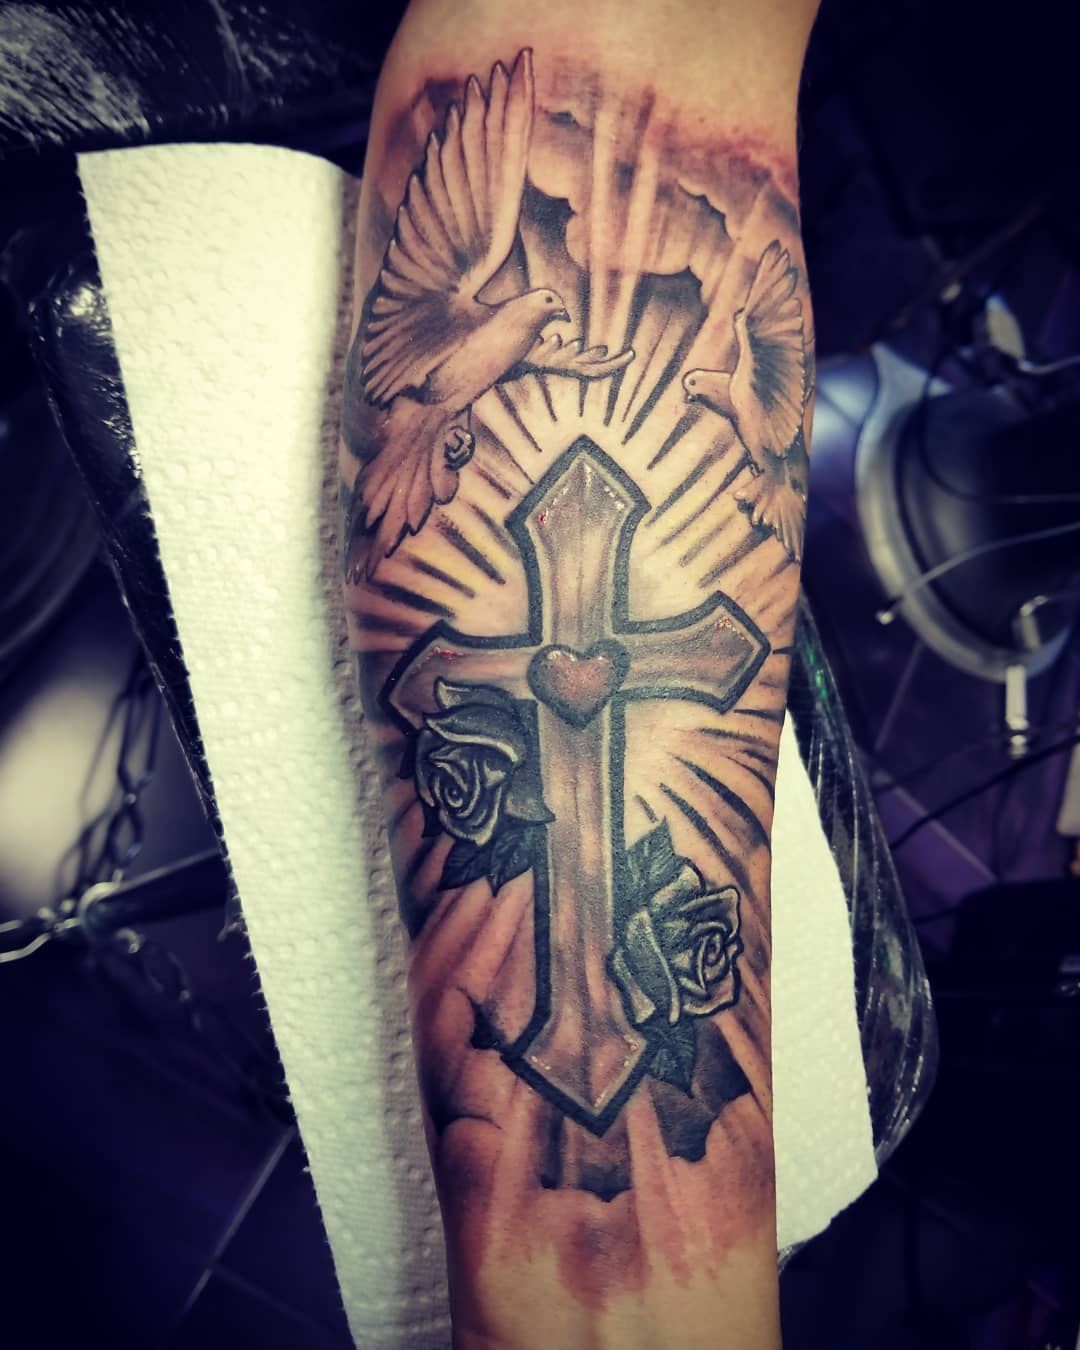 125 Best Cross Tattoos You Can Try Meanings Wild Tattoo Art in dimensions 1080 X 1350